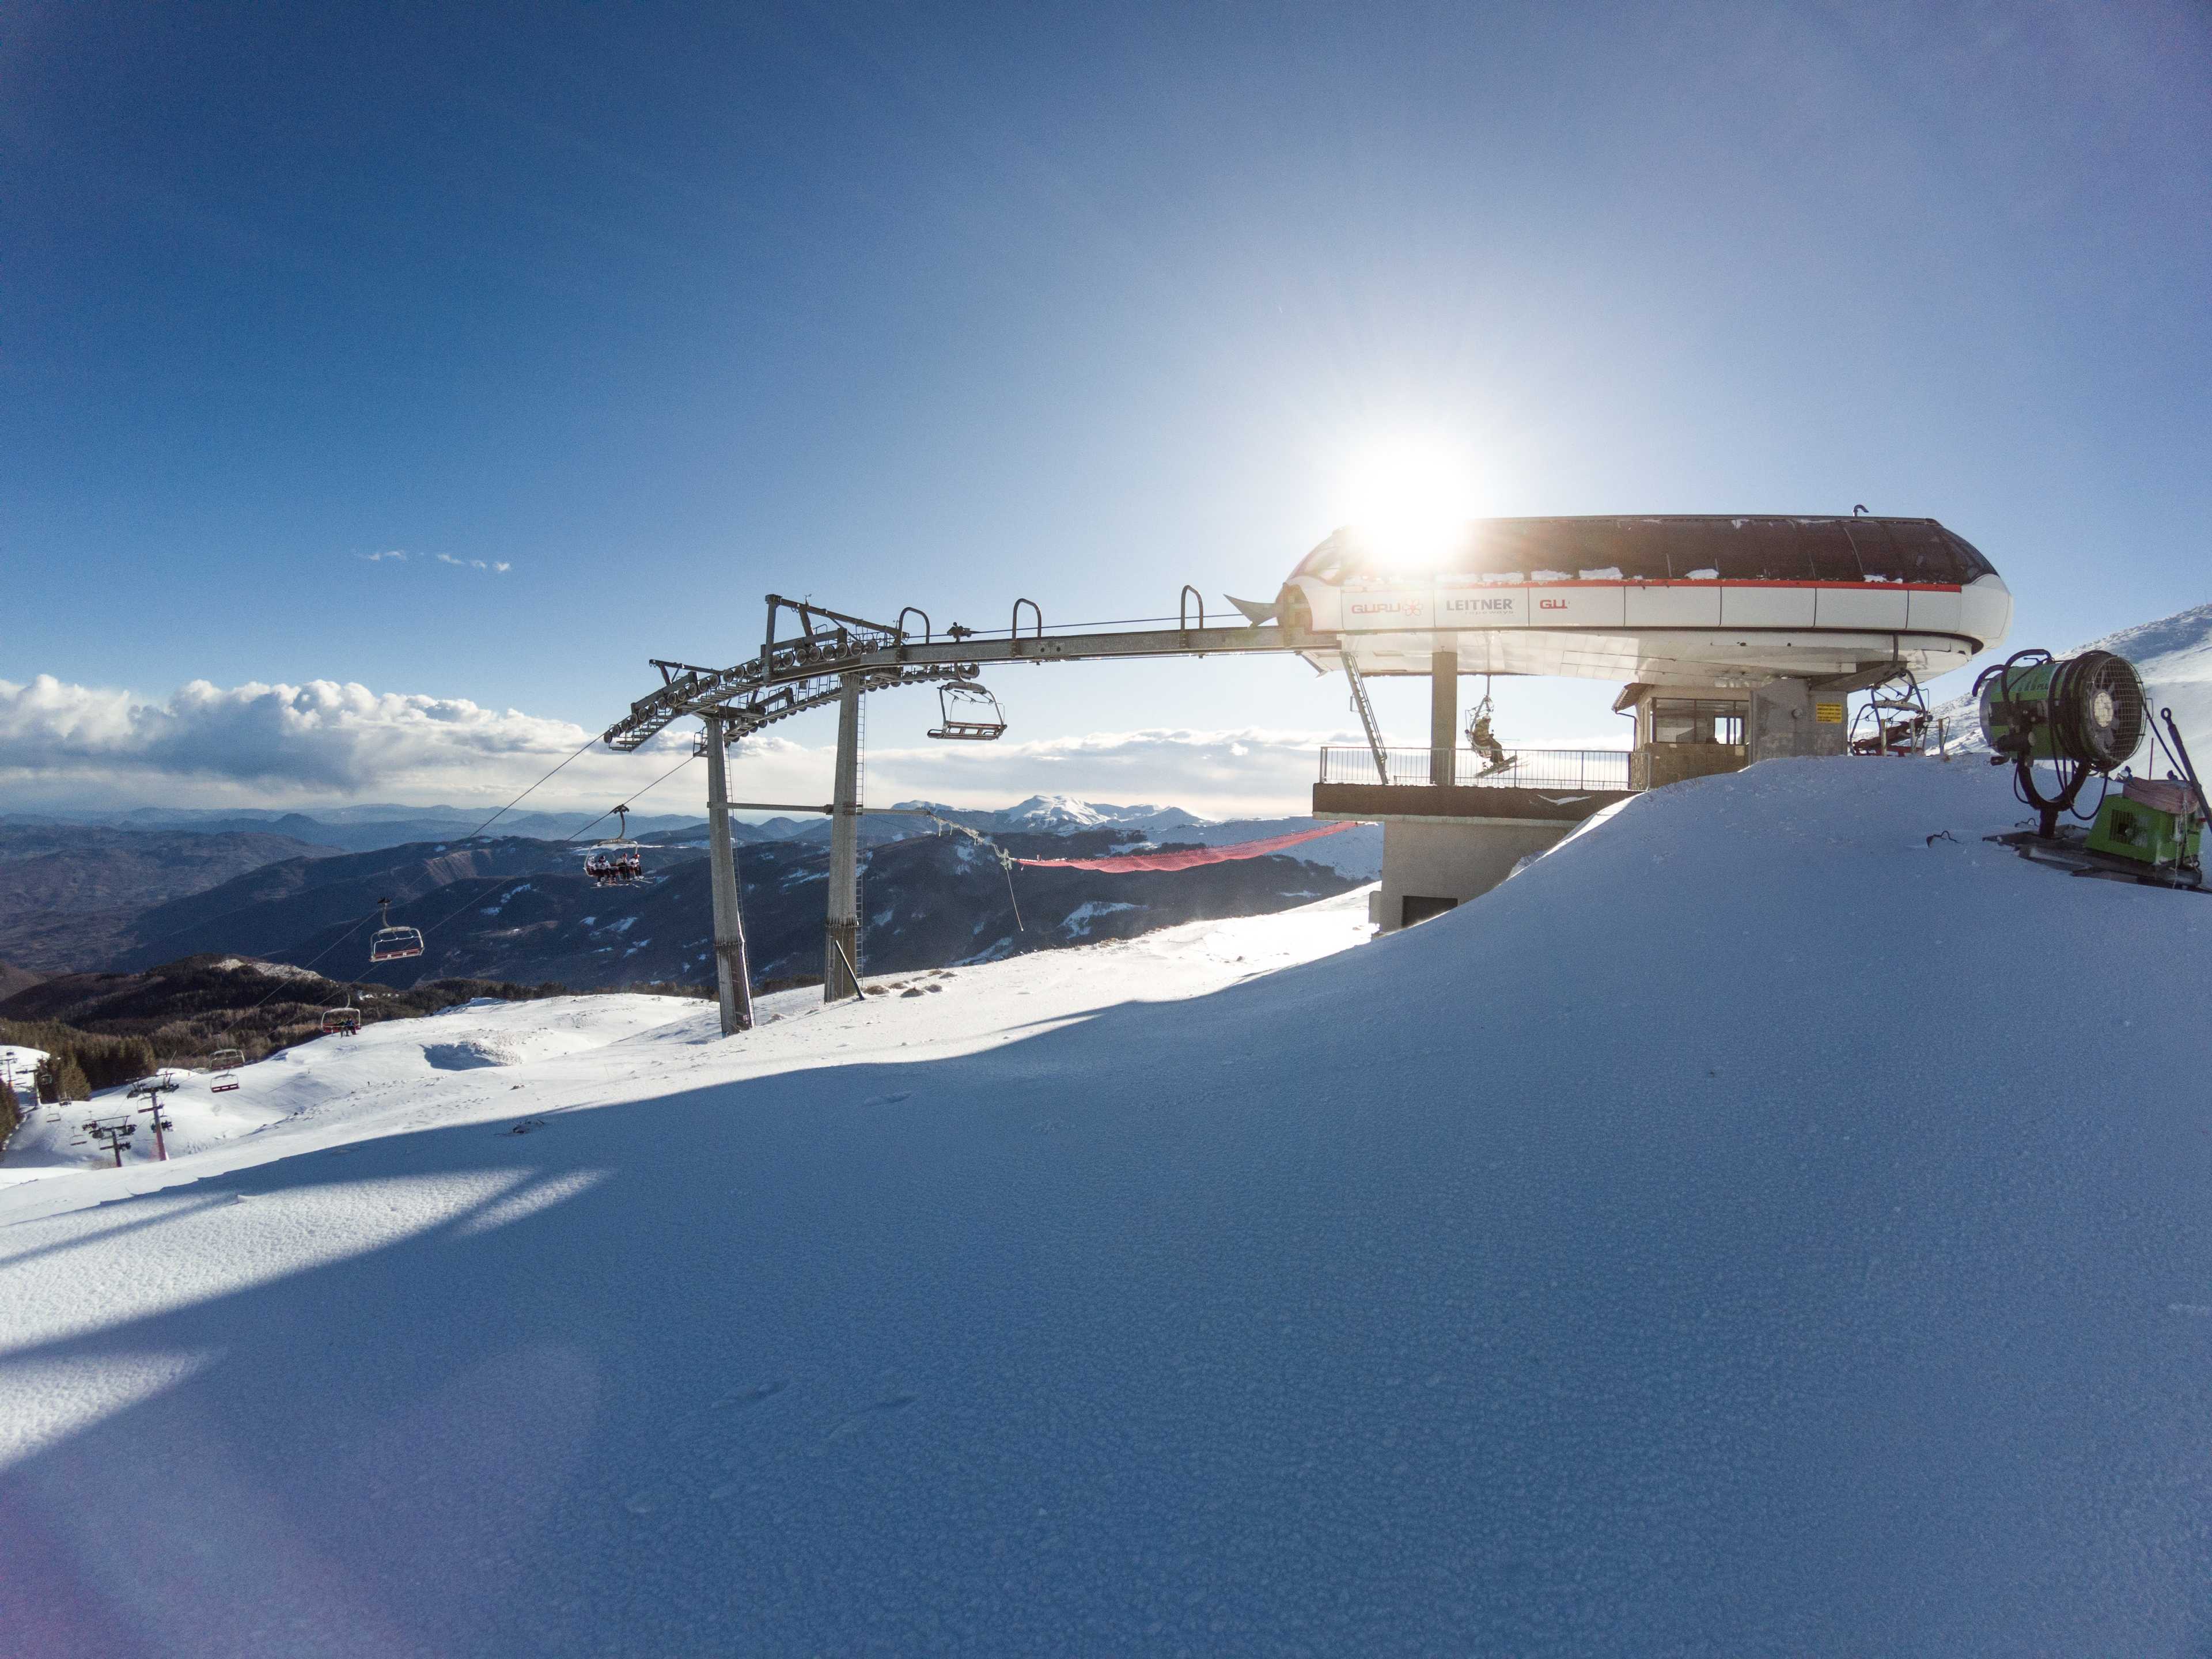 Mountain station of Cimoncino I sixpack chairlift, Monte Cimone